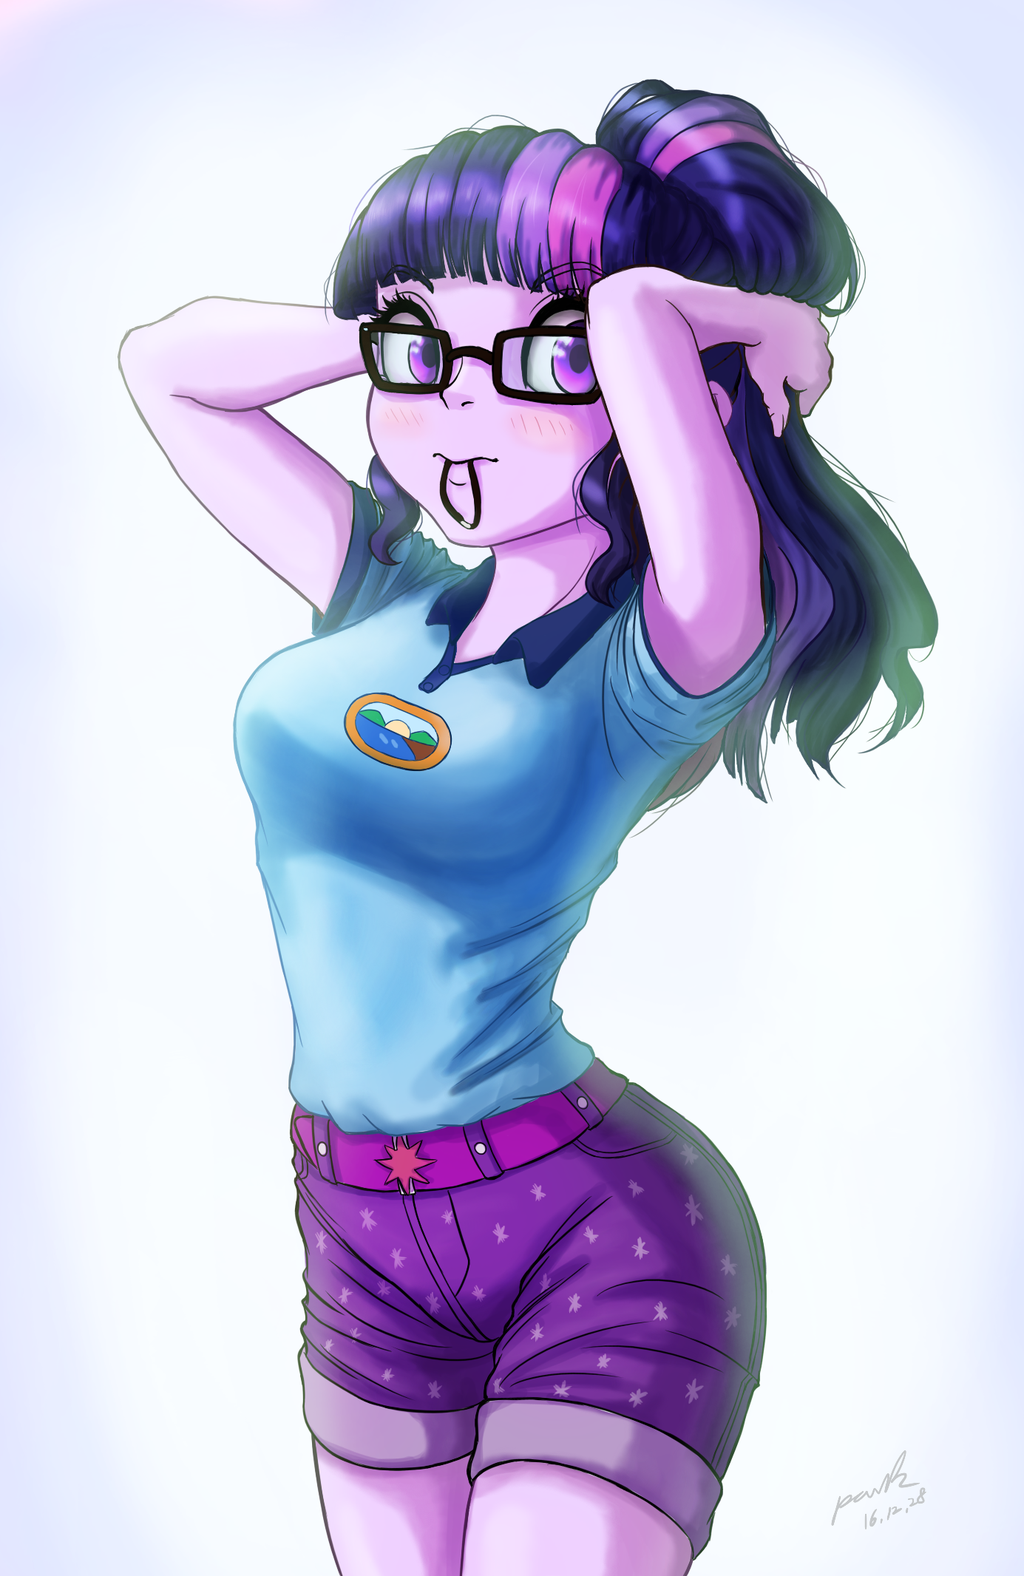 twilight_sparkle_by_the_park-data73j.png